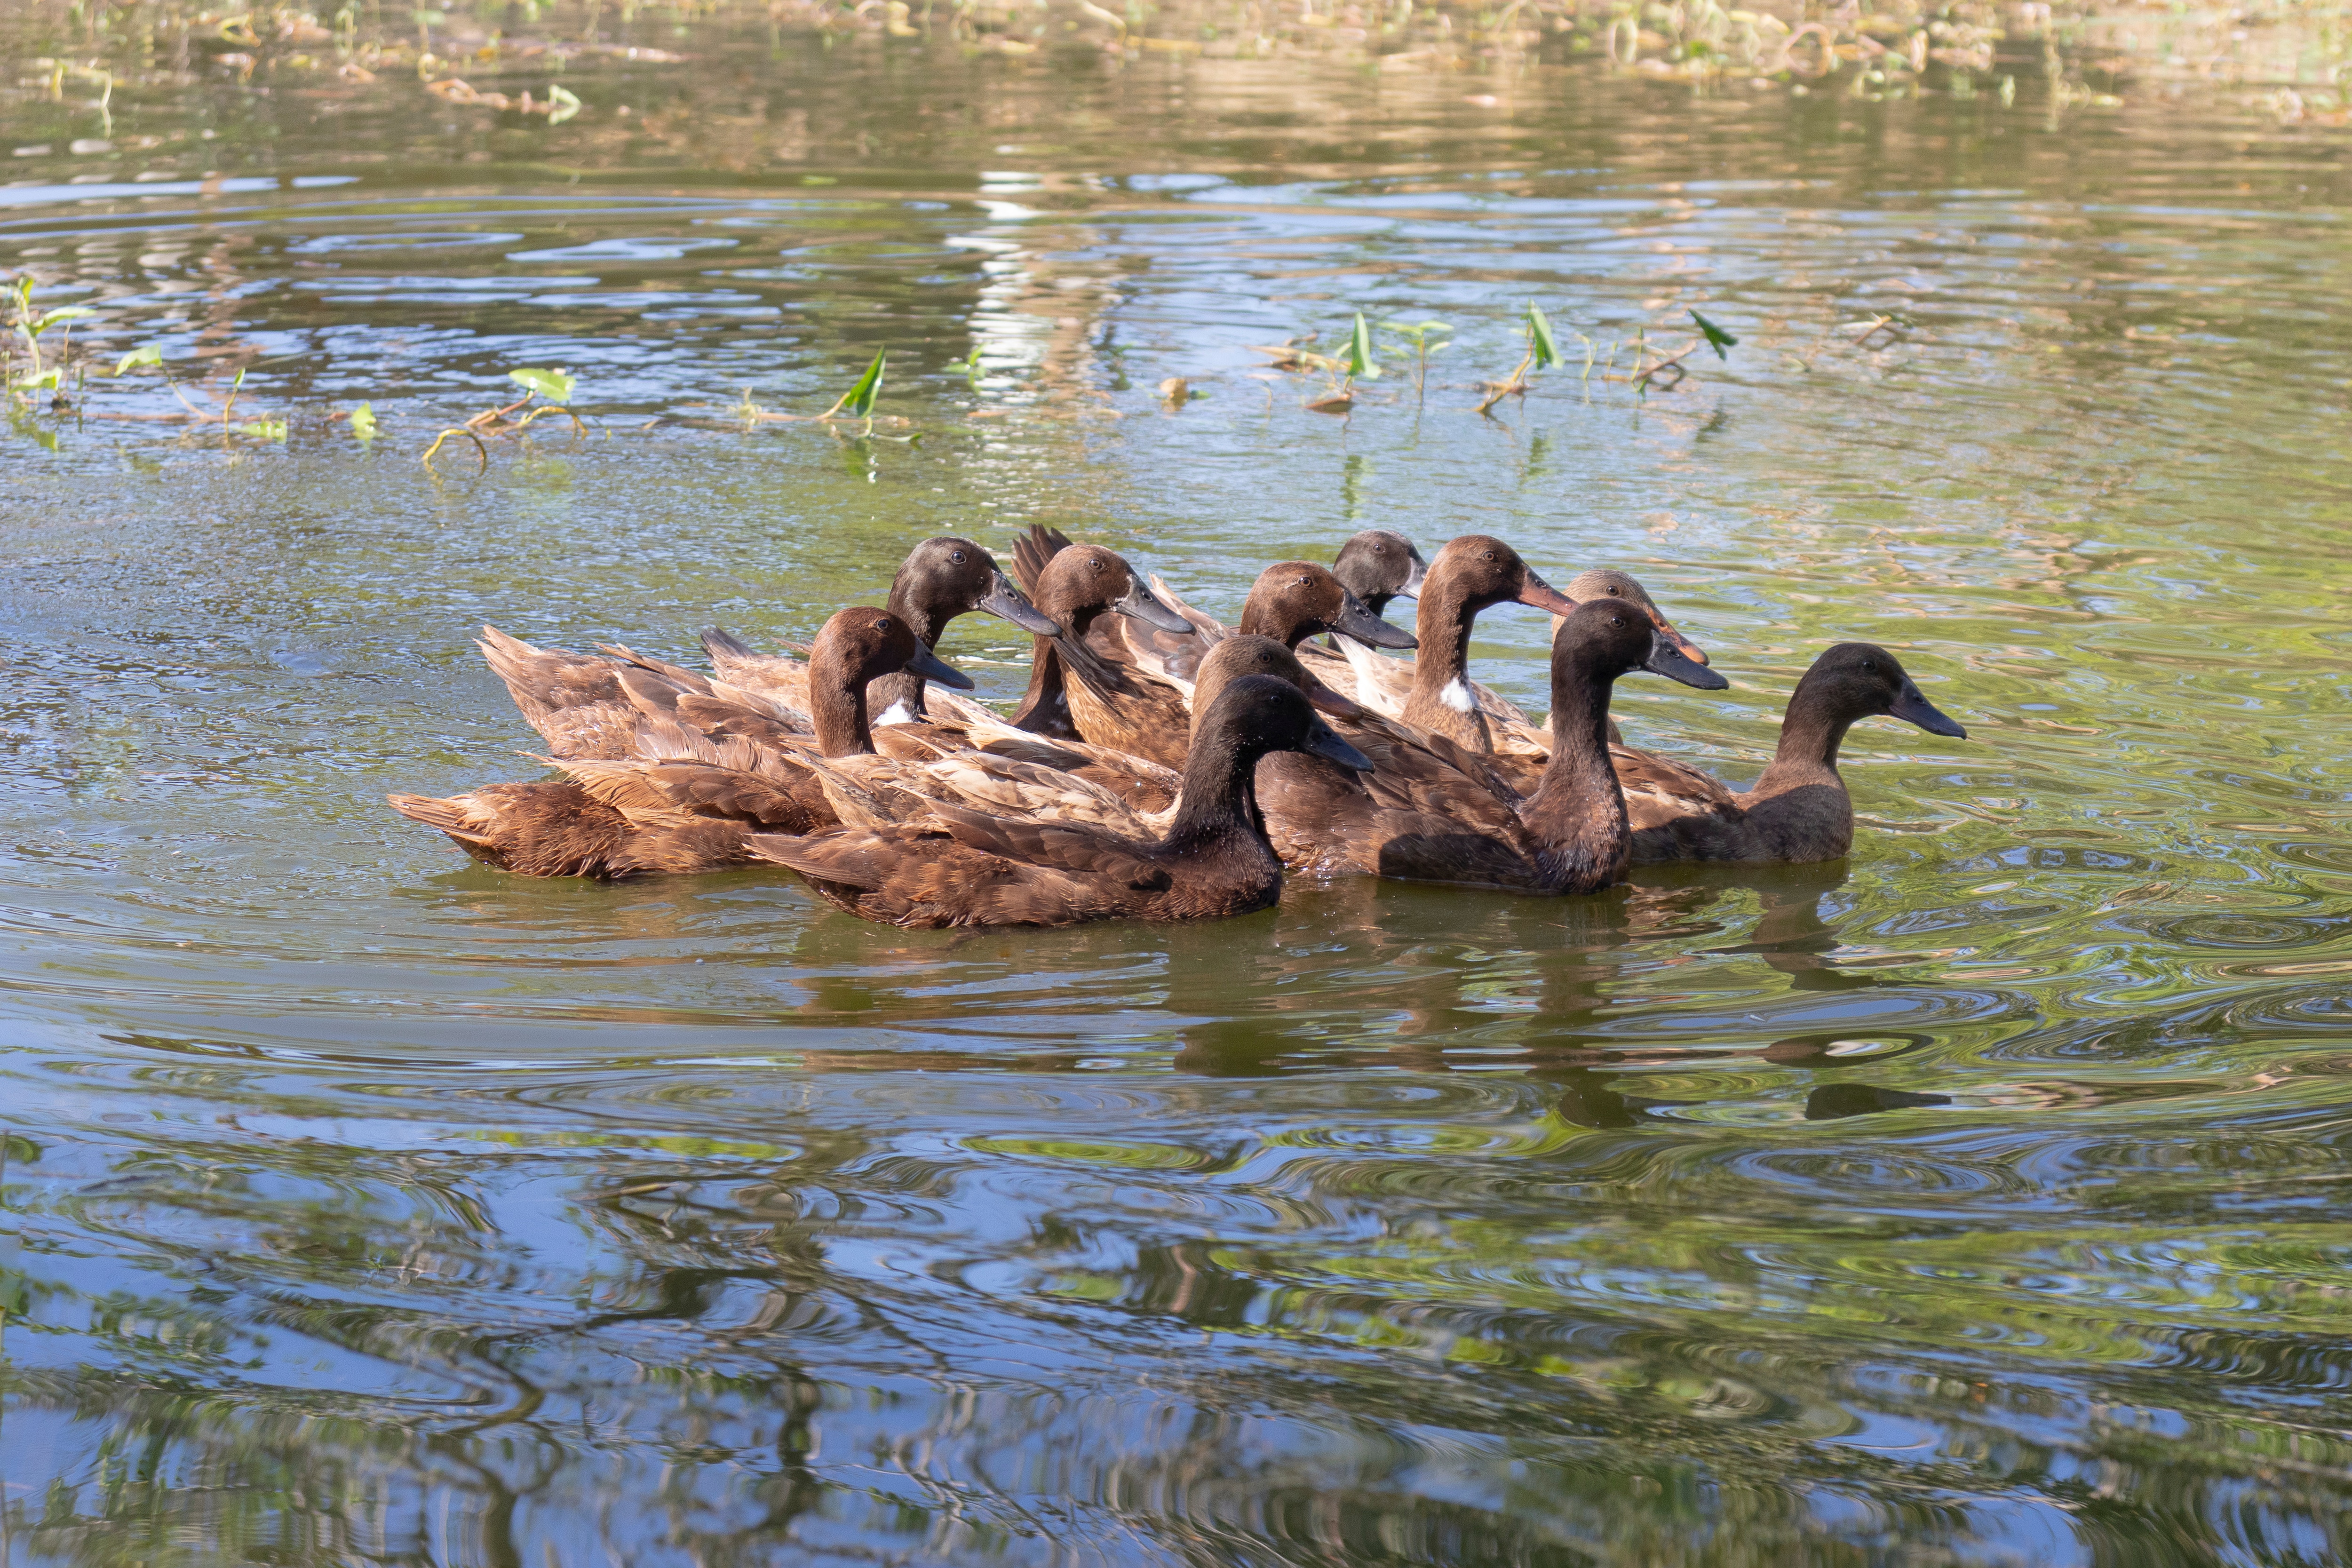 A group of ducks swimming together.